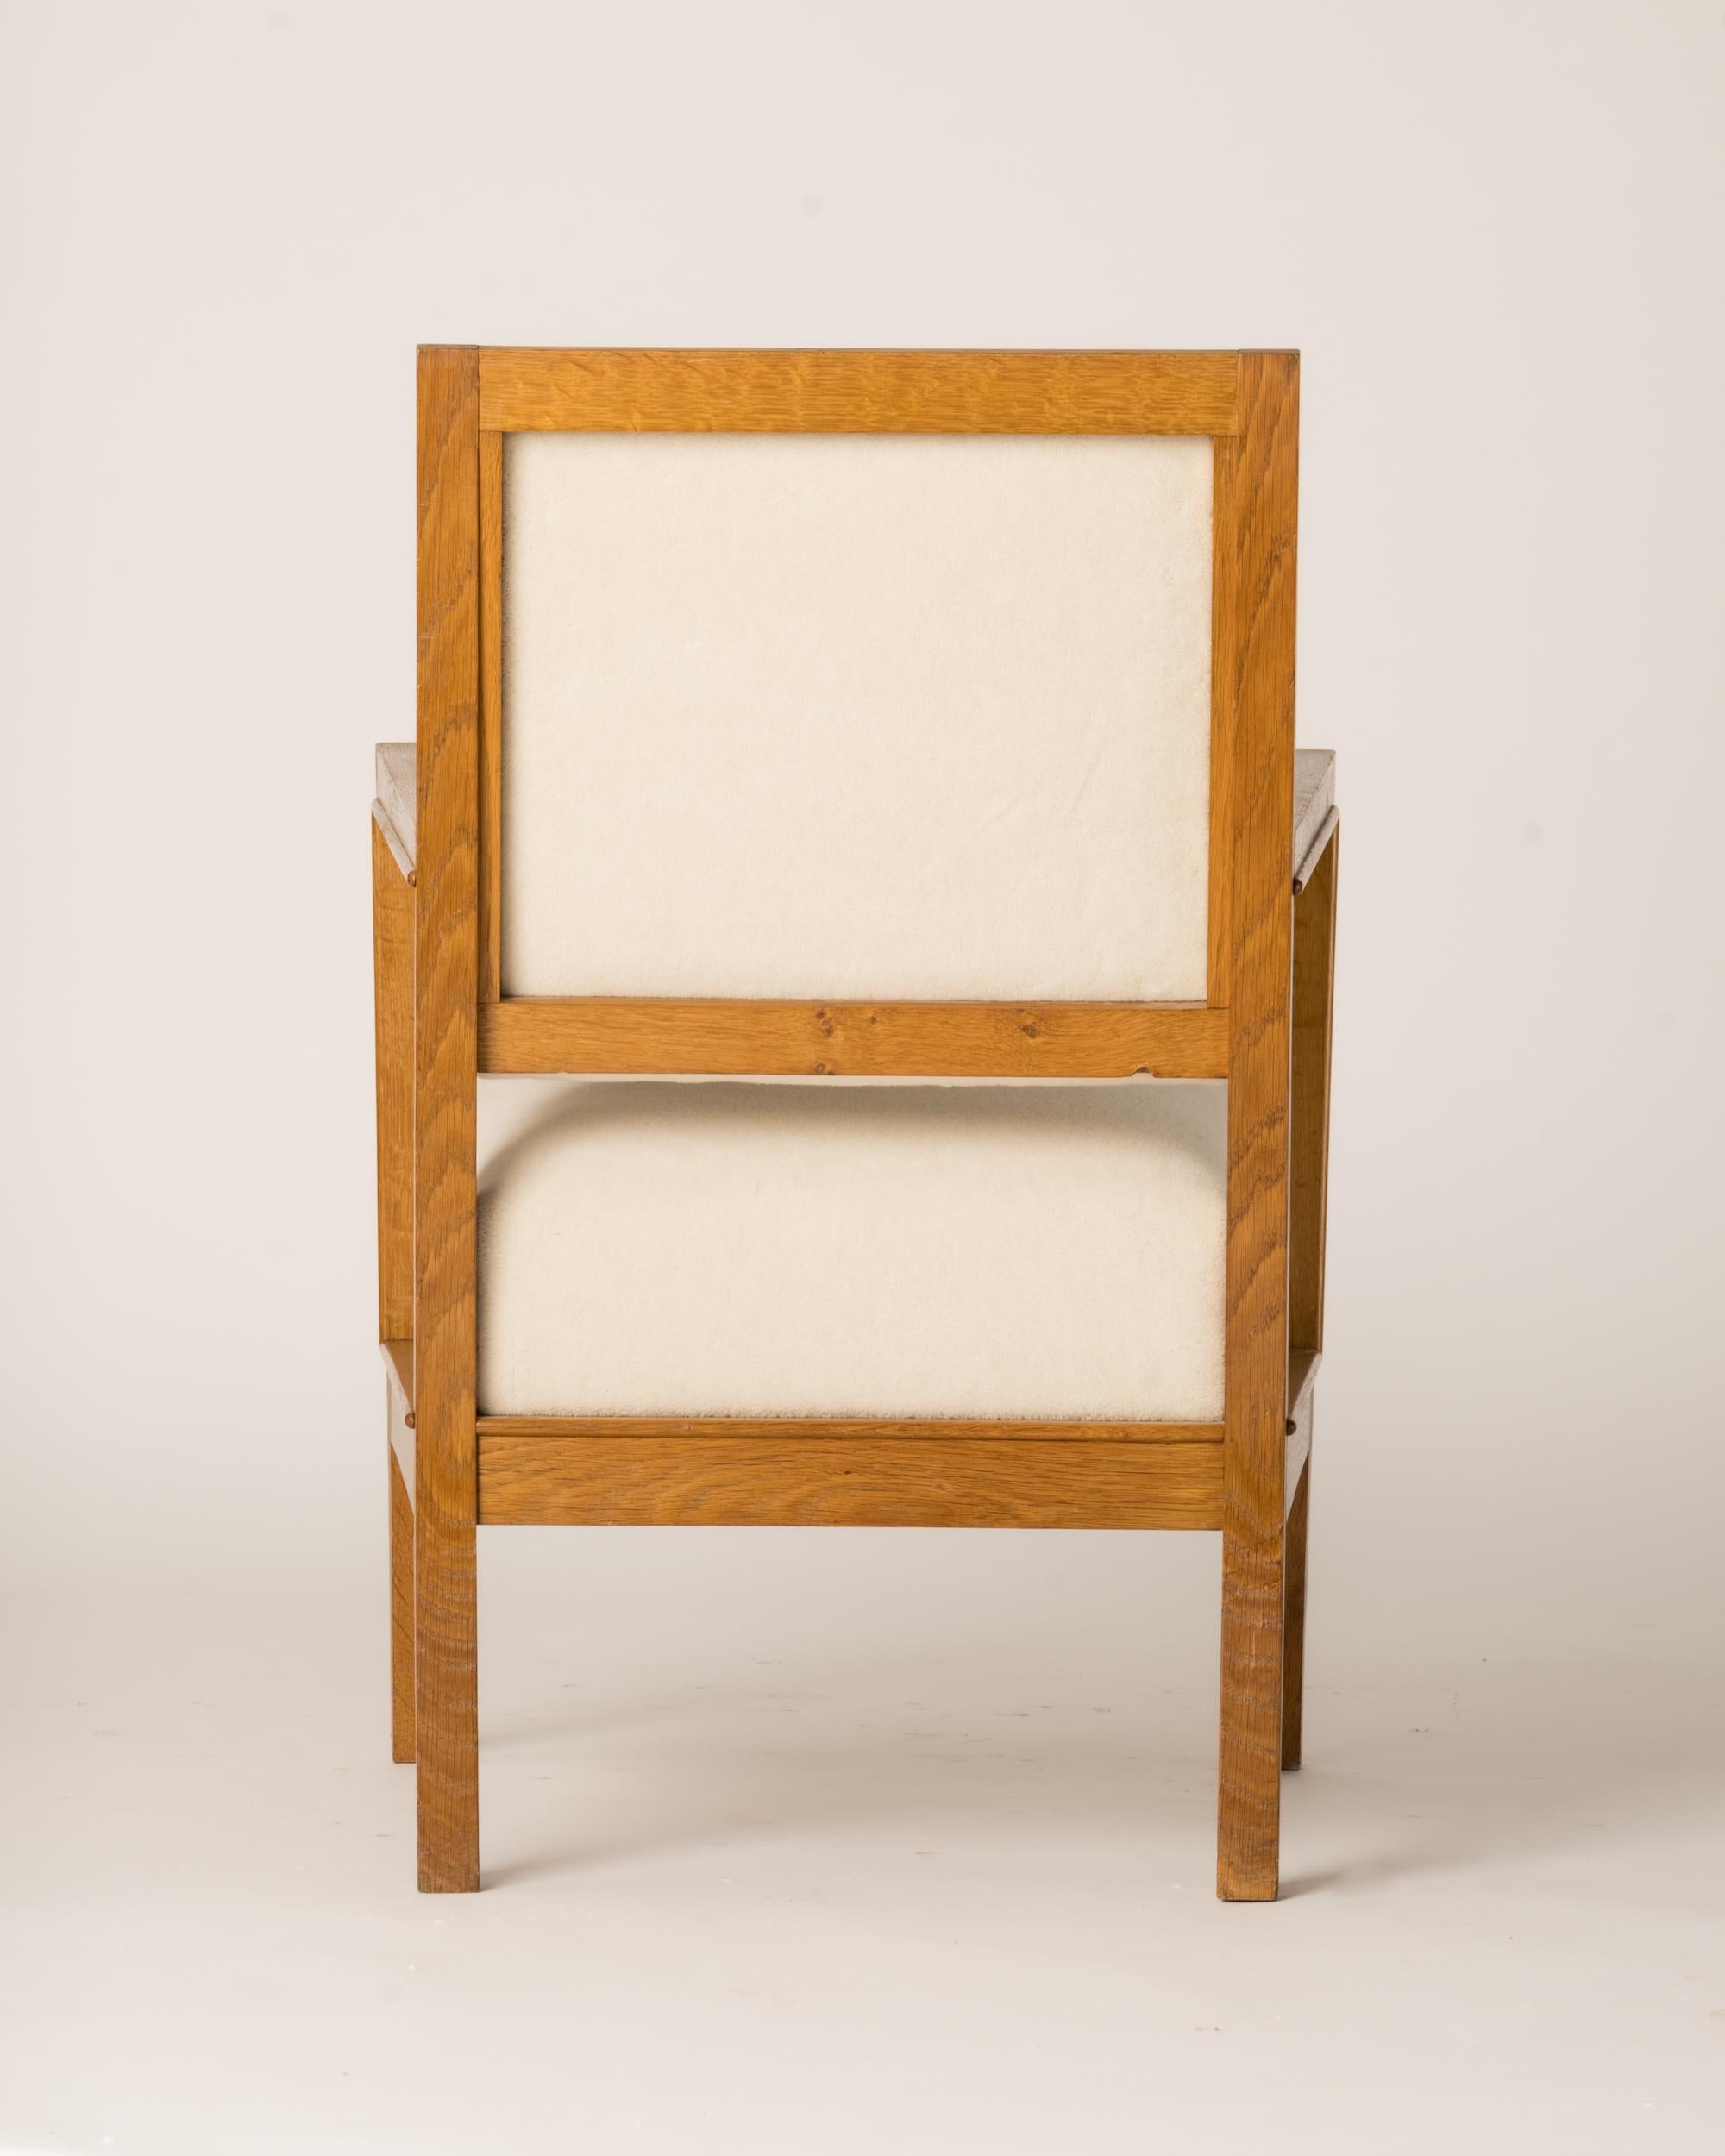 Minimalist Solid Oak Armchair Creme Pierre Frey Mohair, France 1940's In Good Condition For Sale In New York, NY